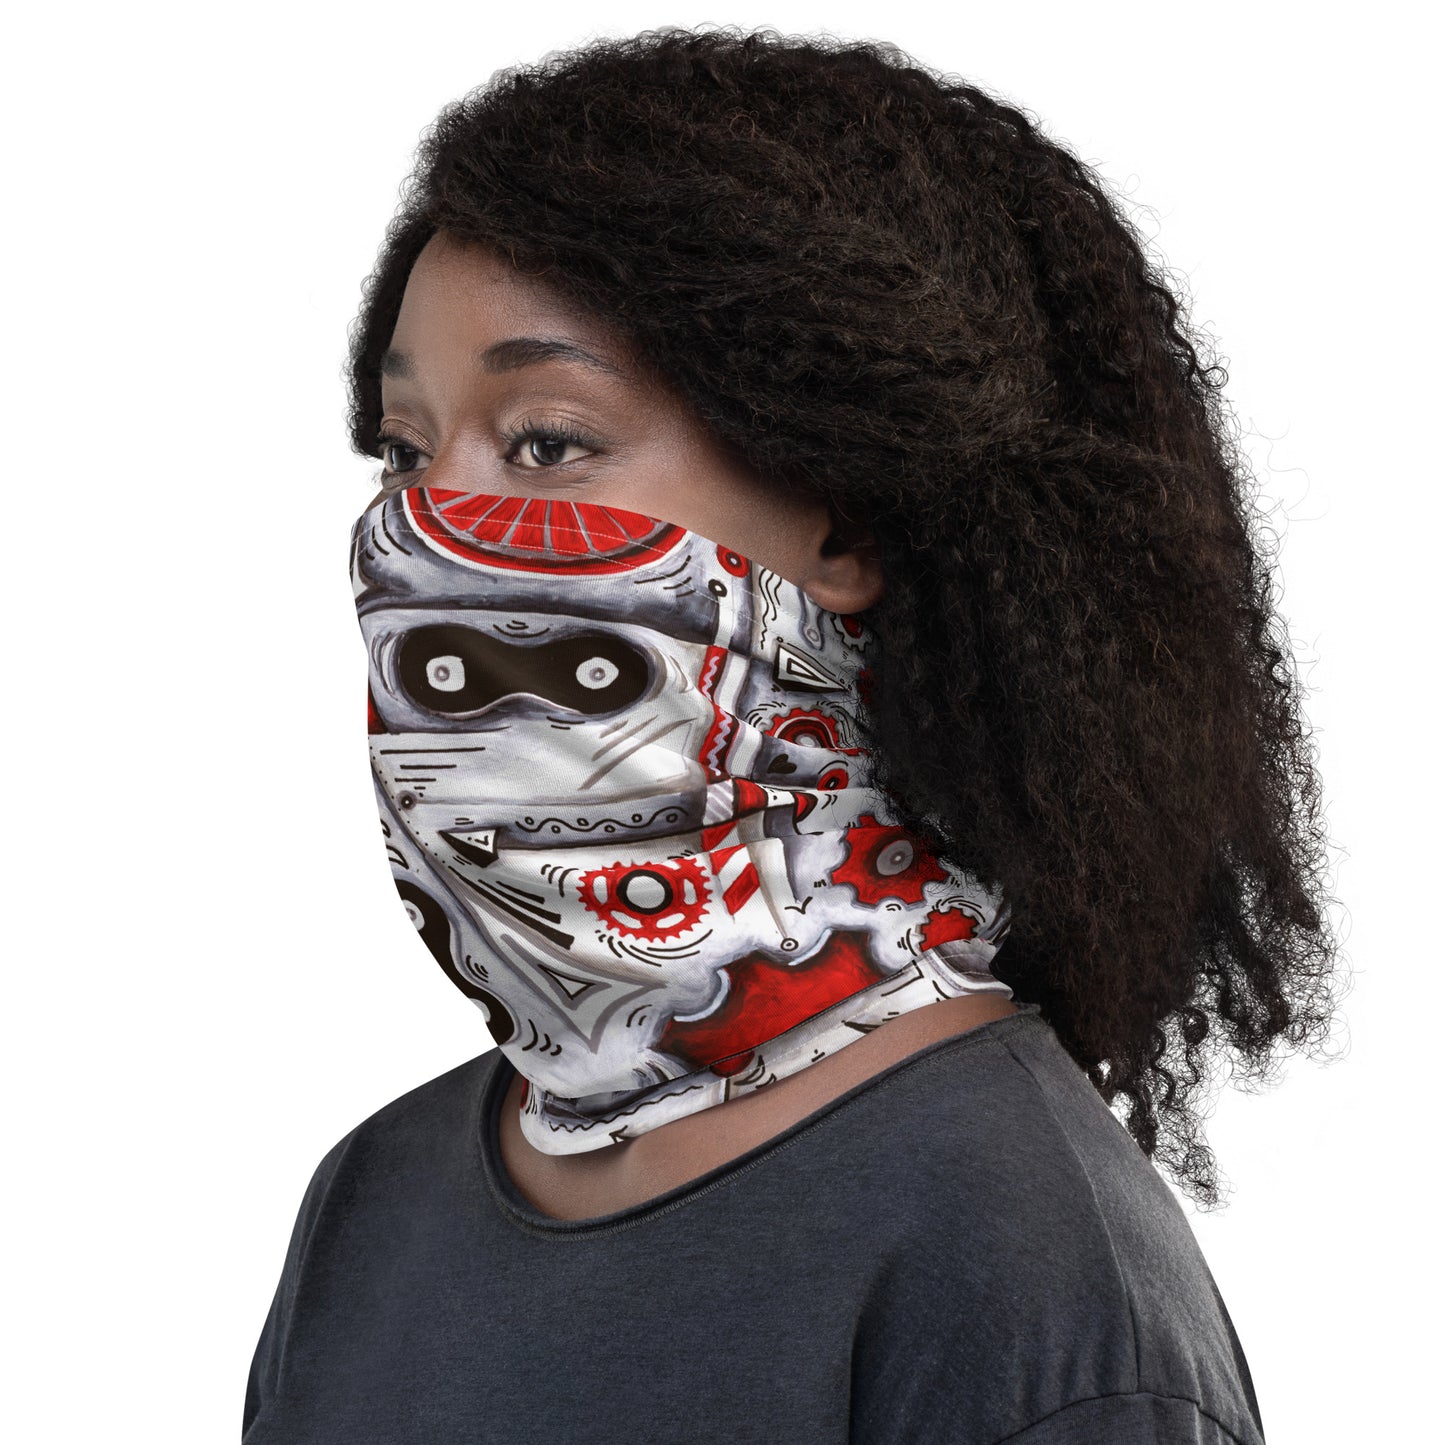 colorful and fun cycling biking neck gaiter in reds and whites. featuring gears and chains, perfect for the avid cycling enthusiasts for chilly rides, or to wear on a hike or anytime you  would wear a neck gaiter and want something fun and stylish! From the chic, modern cycling brand AROON